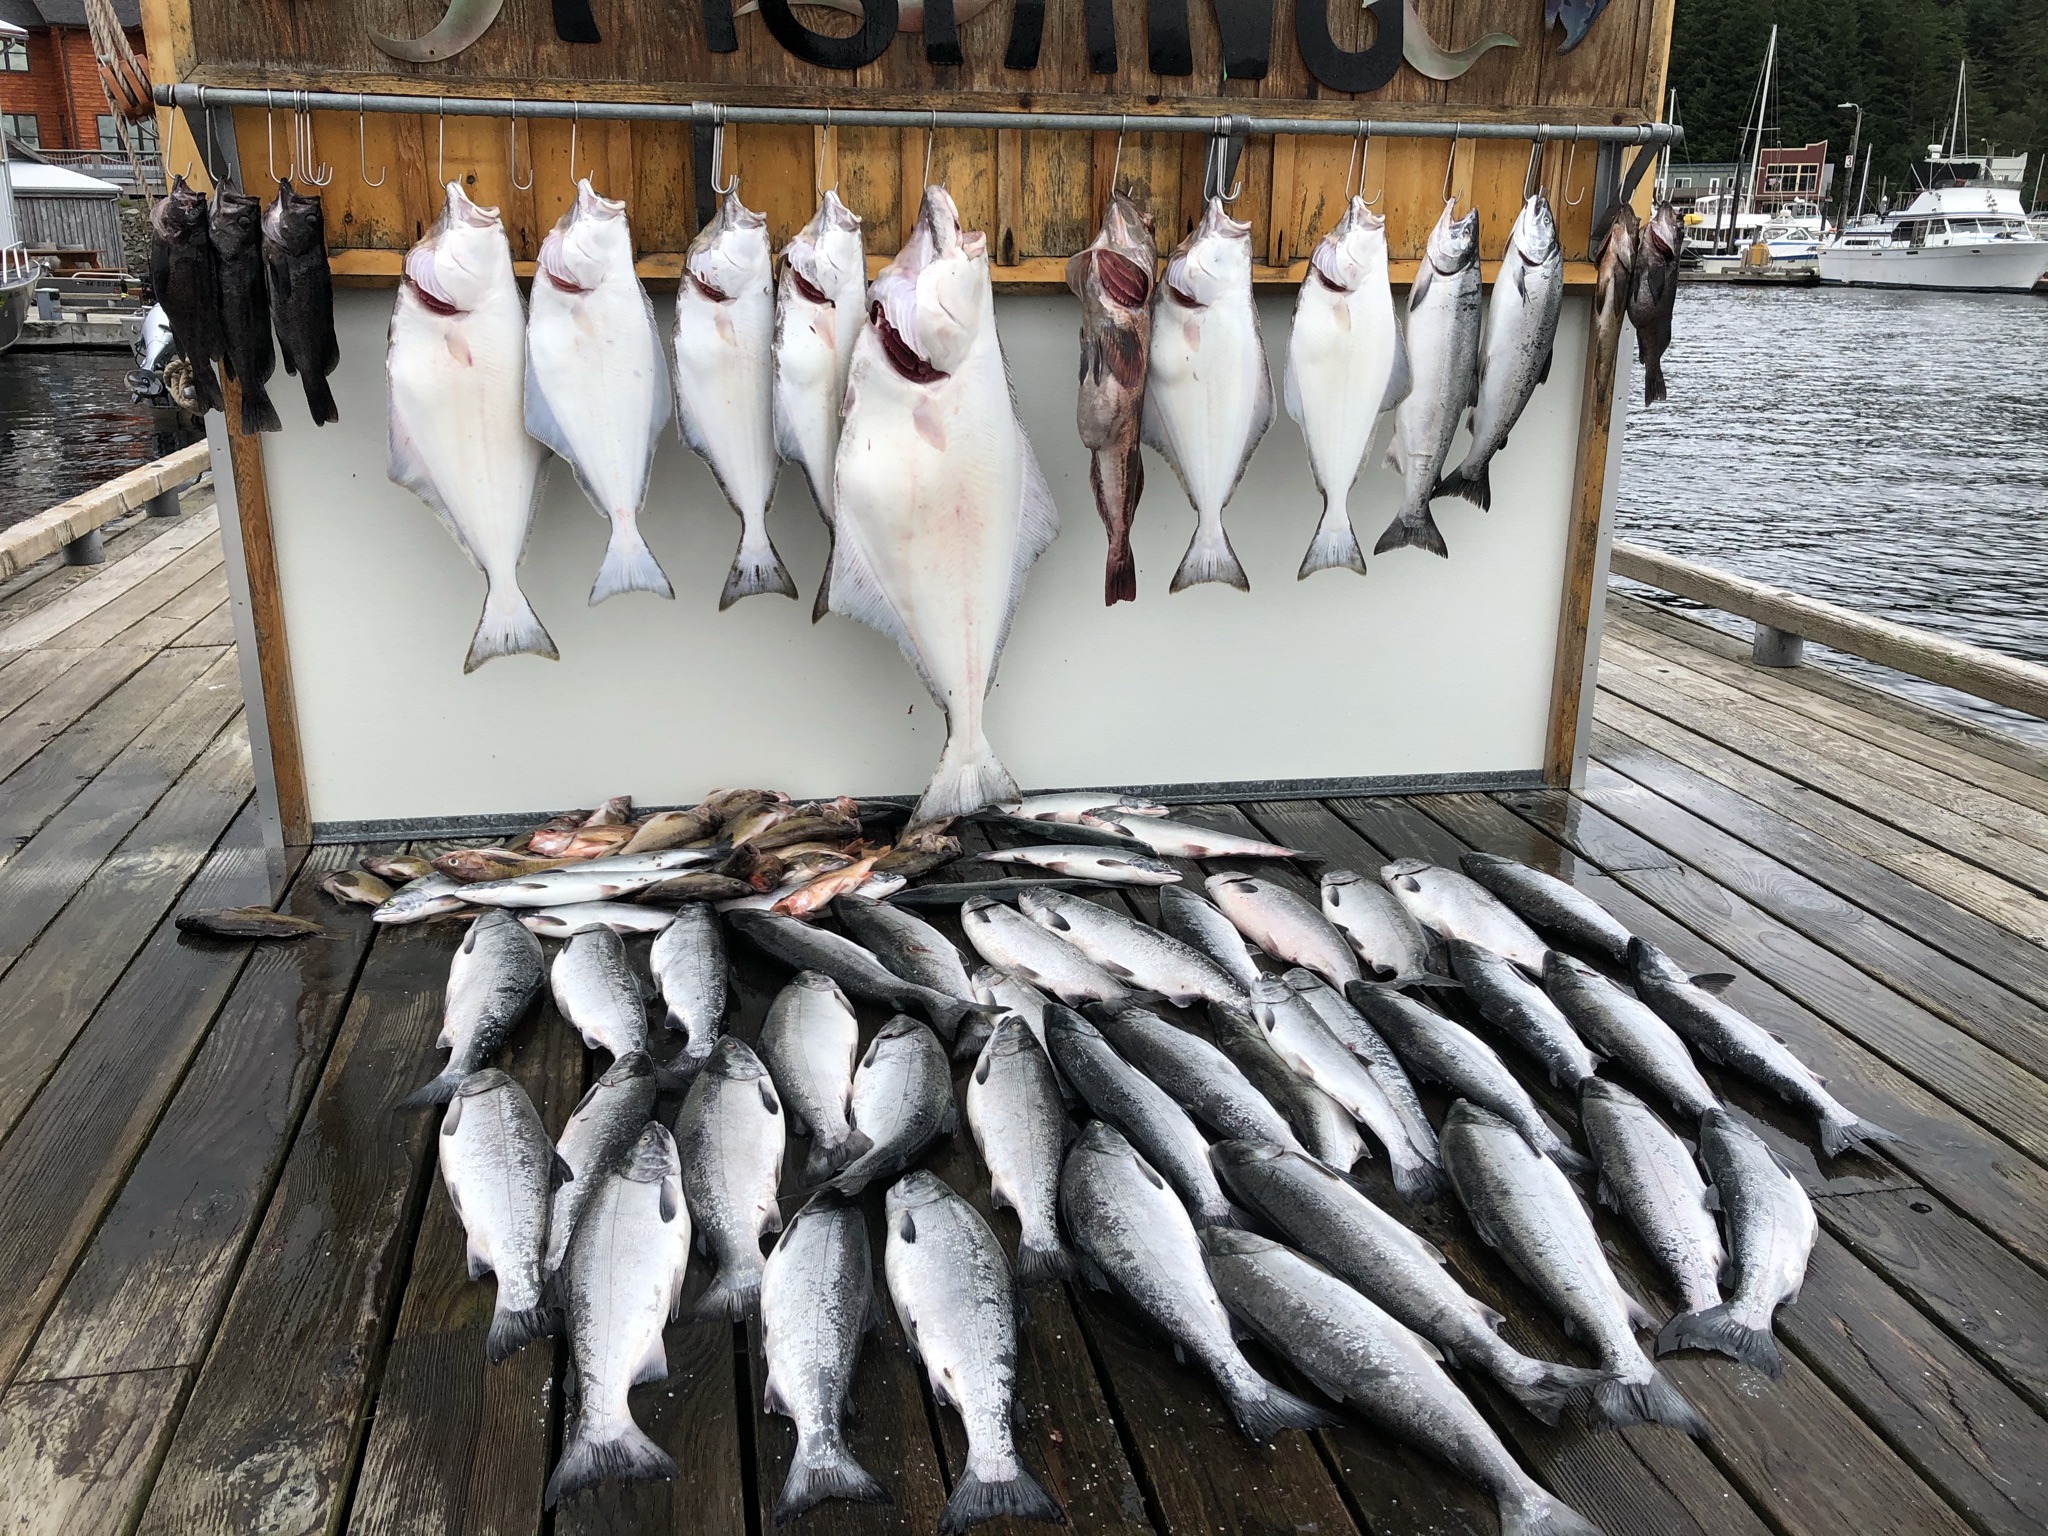 Day-of fishing charters and excursions in Ketchikan.